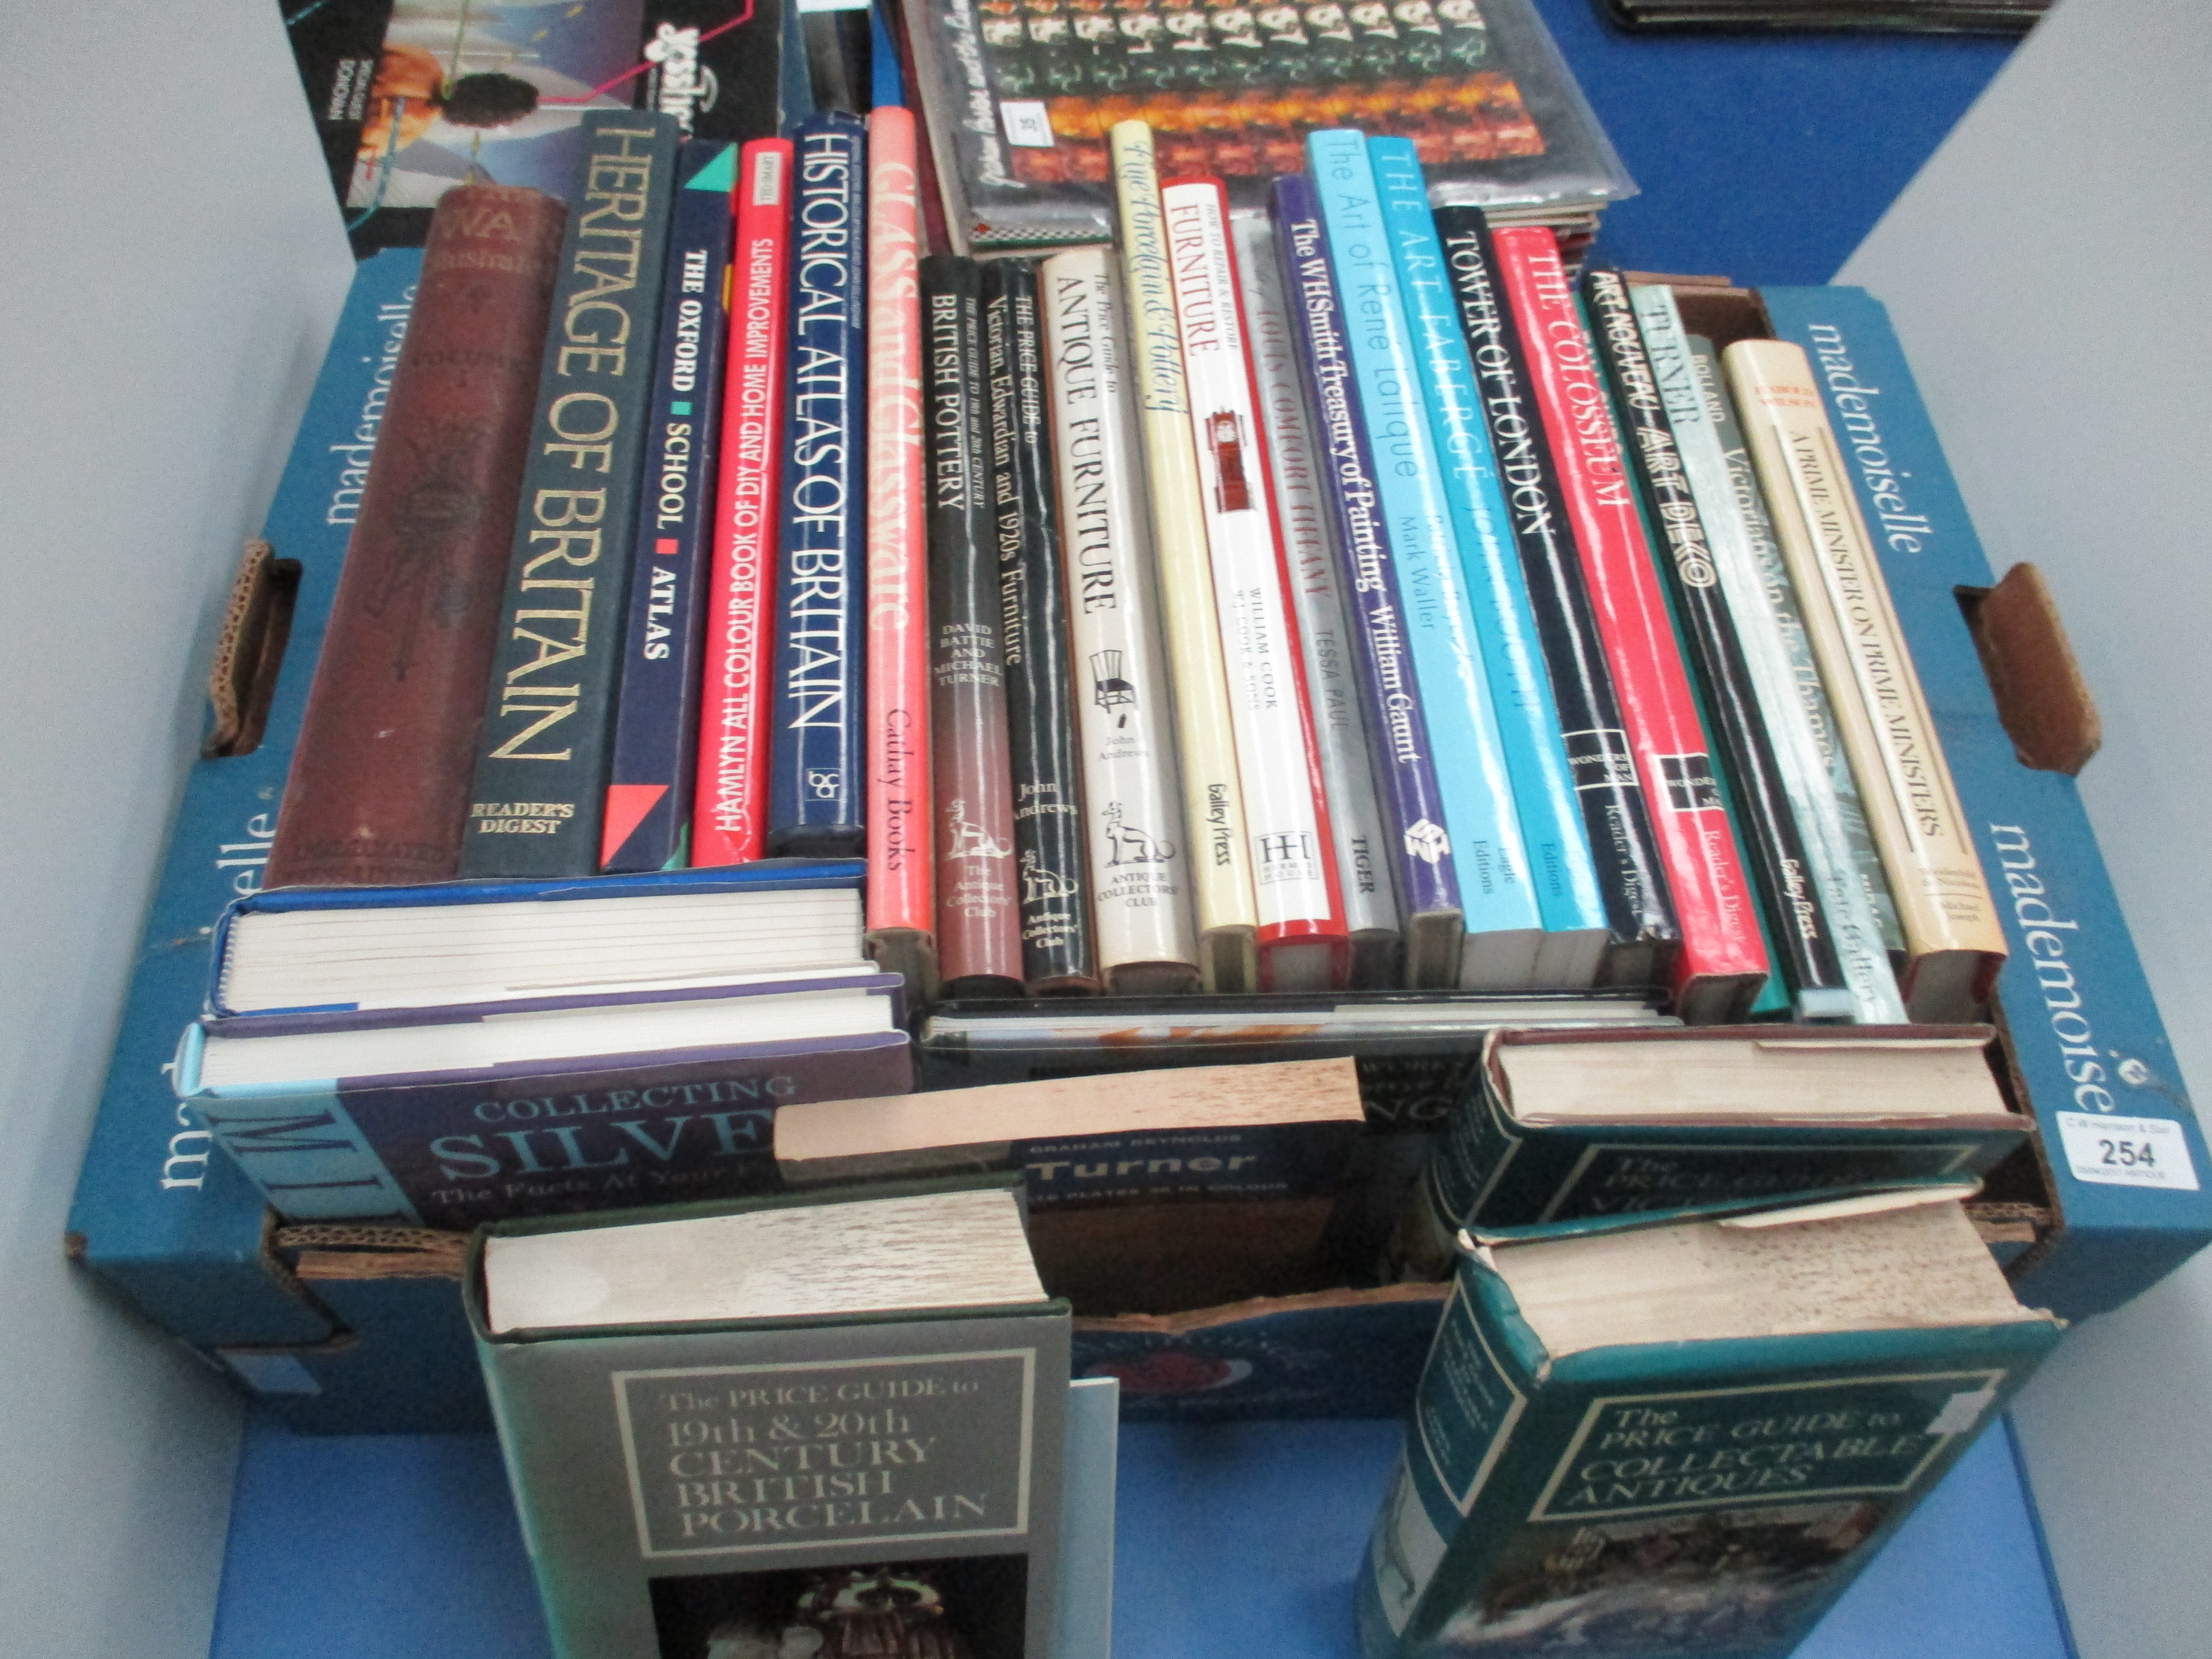 Contents to box - books on antiques - Antique Furniture, British Pottery,